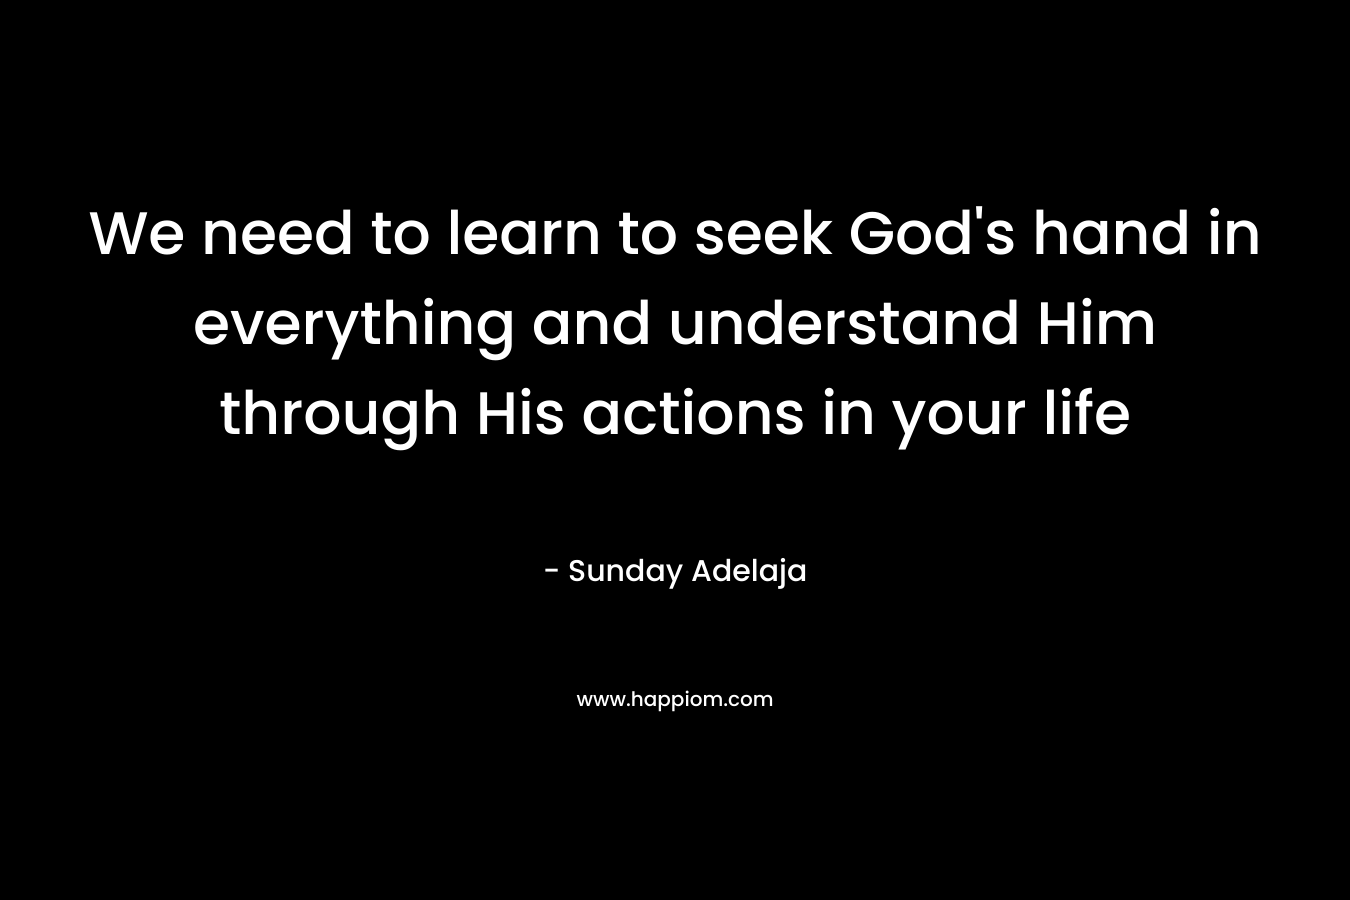 We need to learn to seek God’s hand in everything and understand Him through His actions in your life – Sunday Adelaja